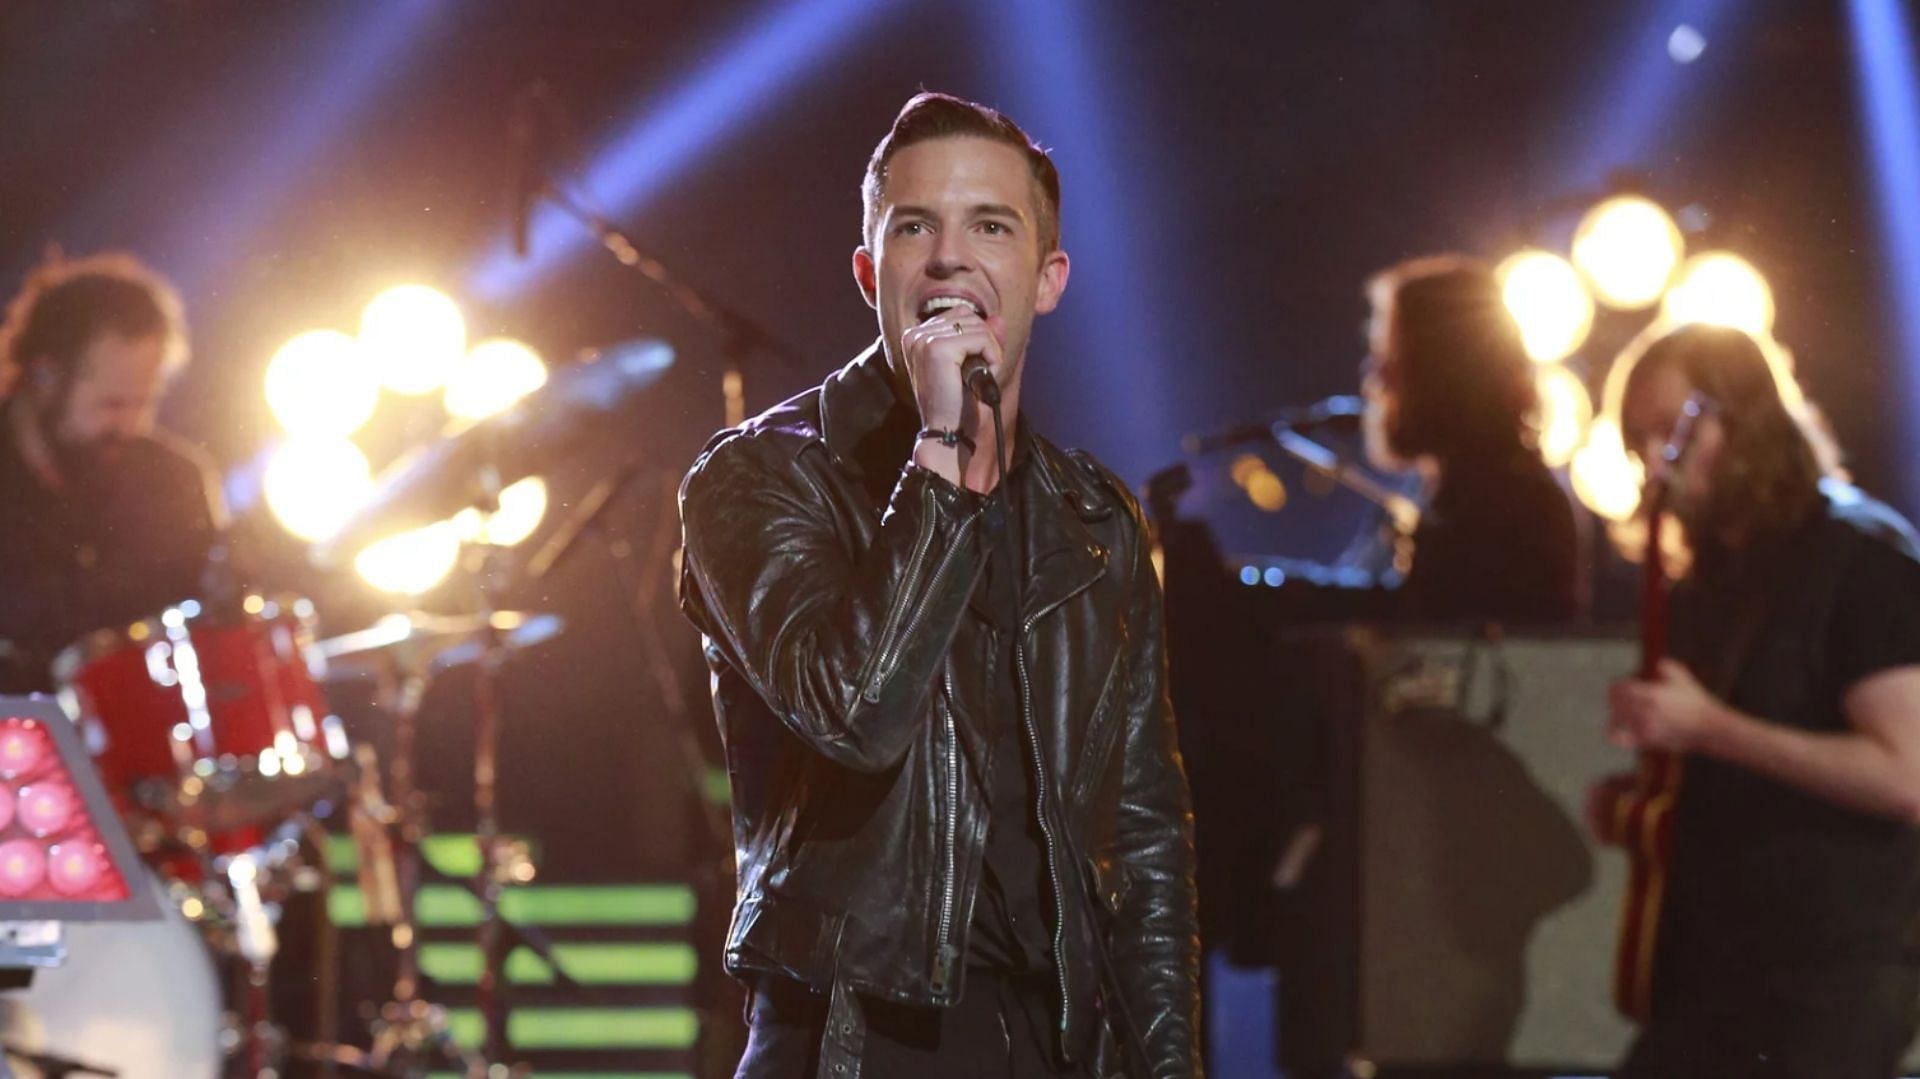 The Killers have released a new single ahed of their tour. (Image via Getty)